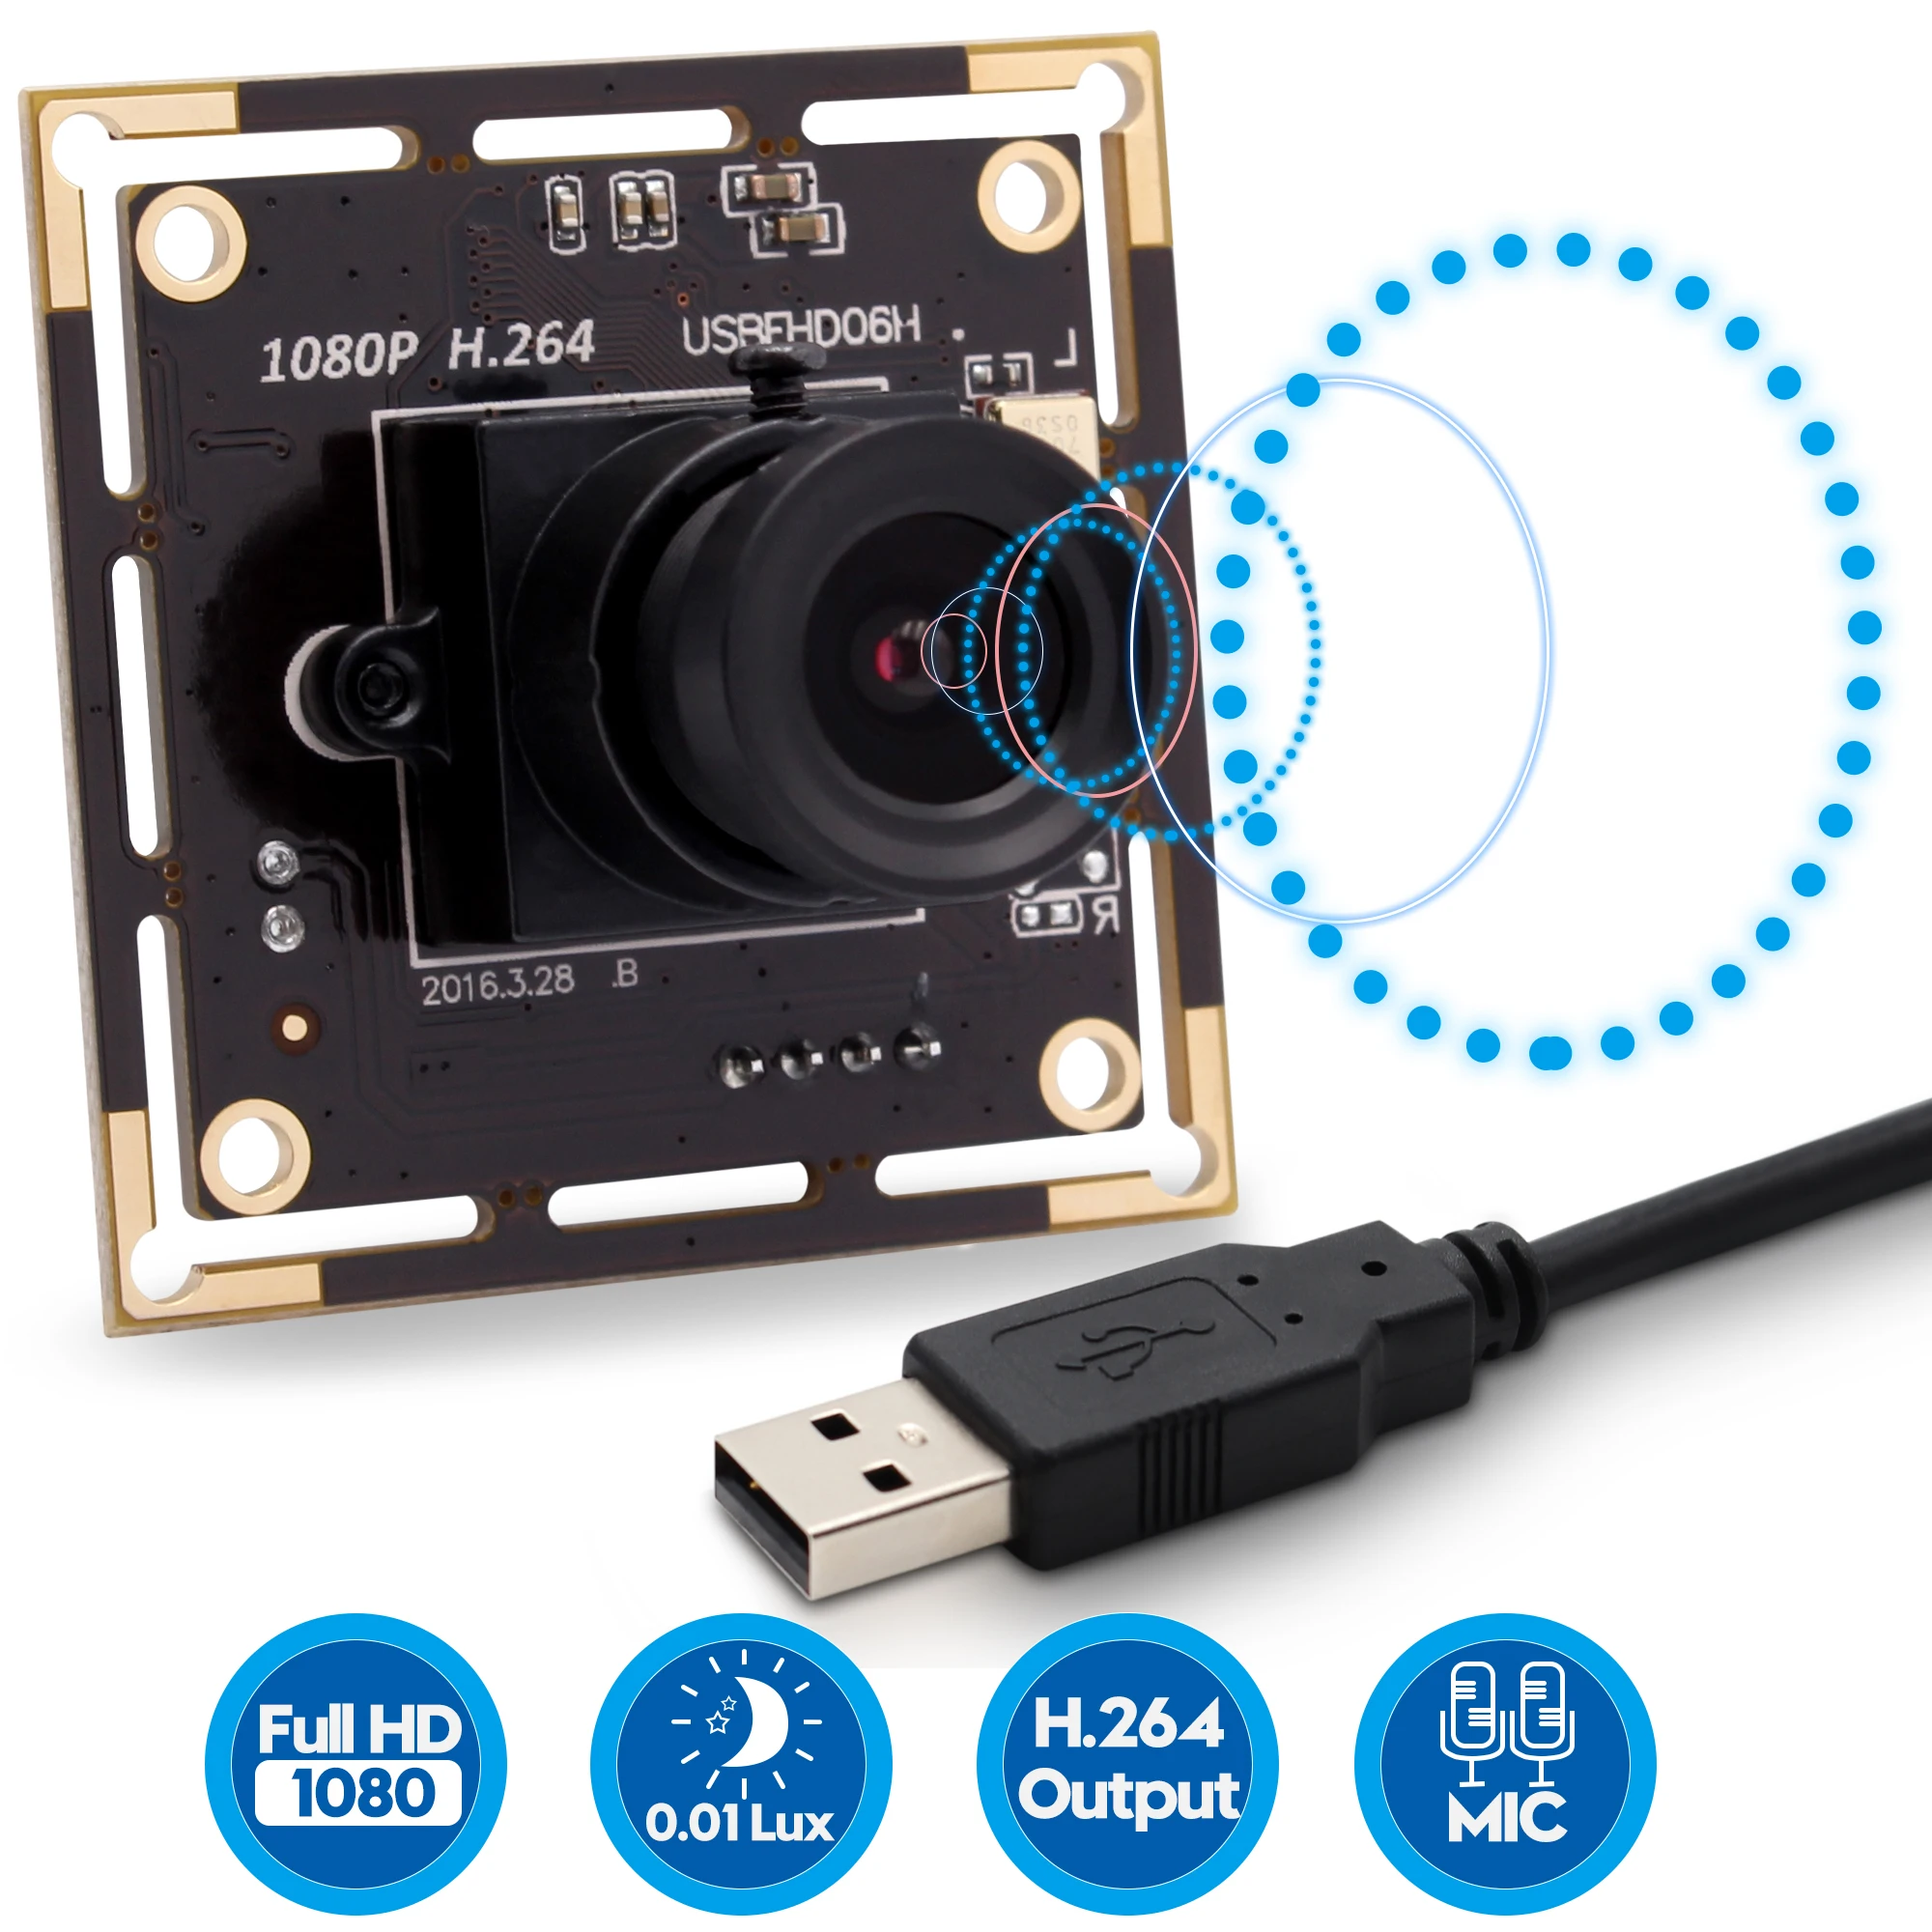 1080P H.264 Low Illumination 0.01lux Sony IMX323 USB Webcam Plug and play USB Camera Module  with 850nm ir pass filter